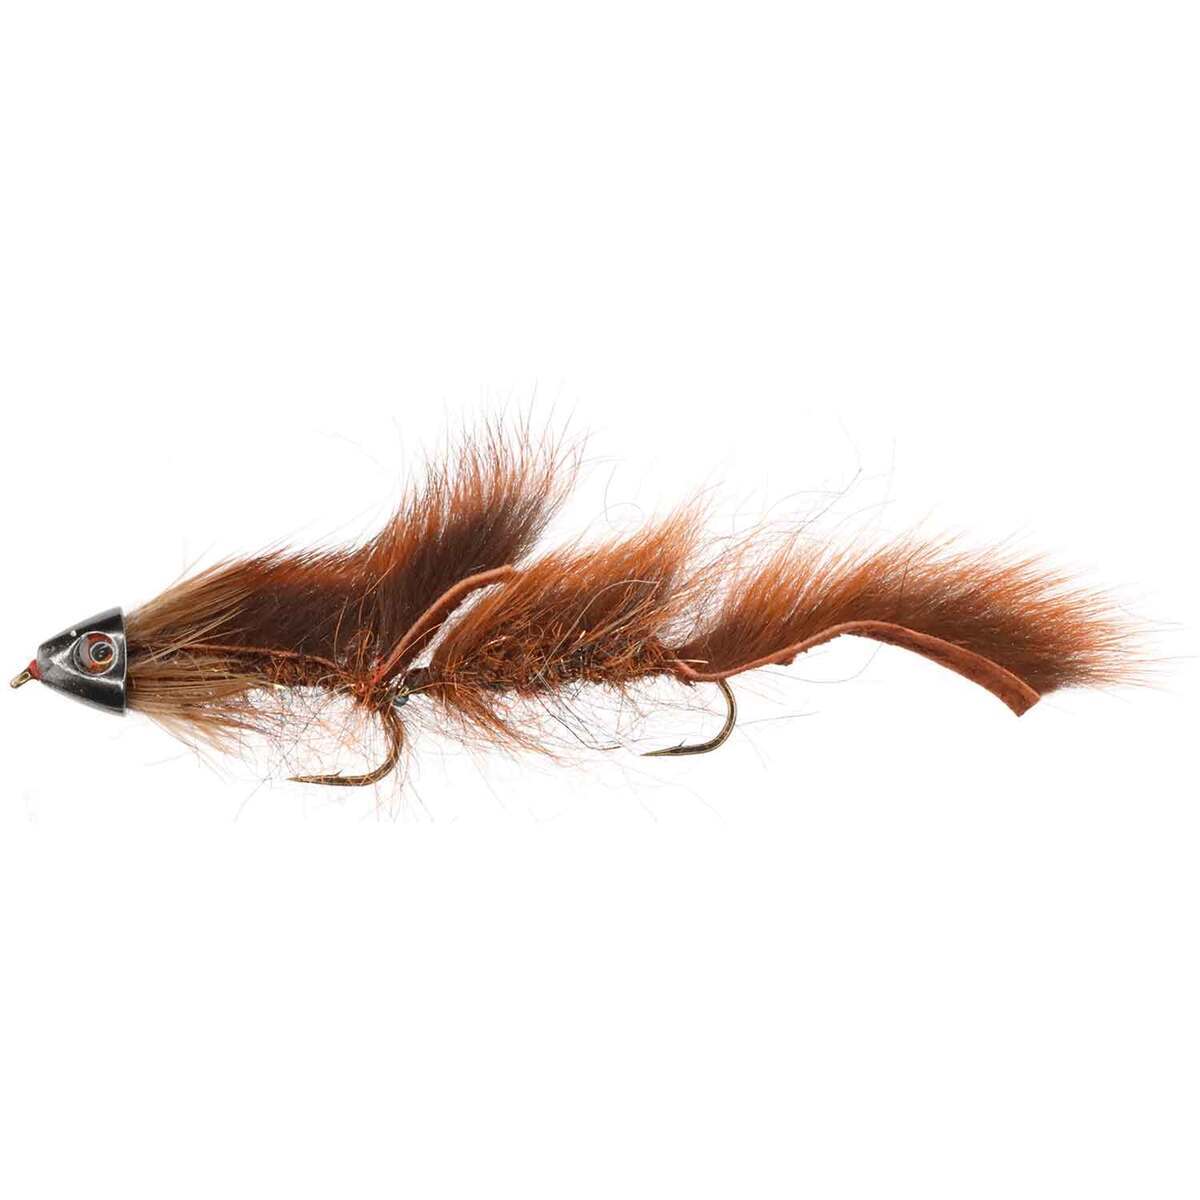 RoundRocks Rust Squirrel Bait Streamer Fly - Size 10 - Rust 10 by Sportsman's Warehouse